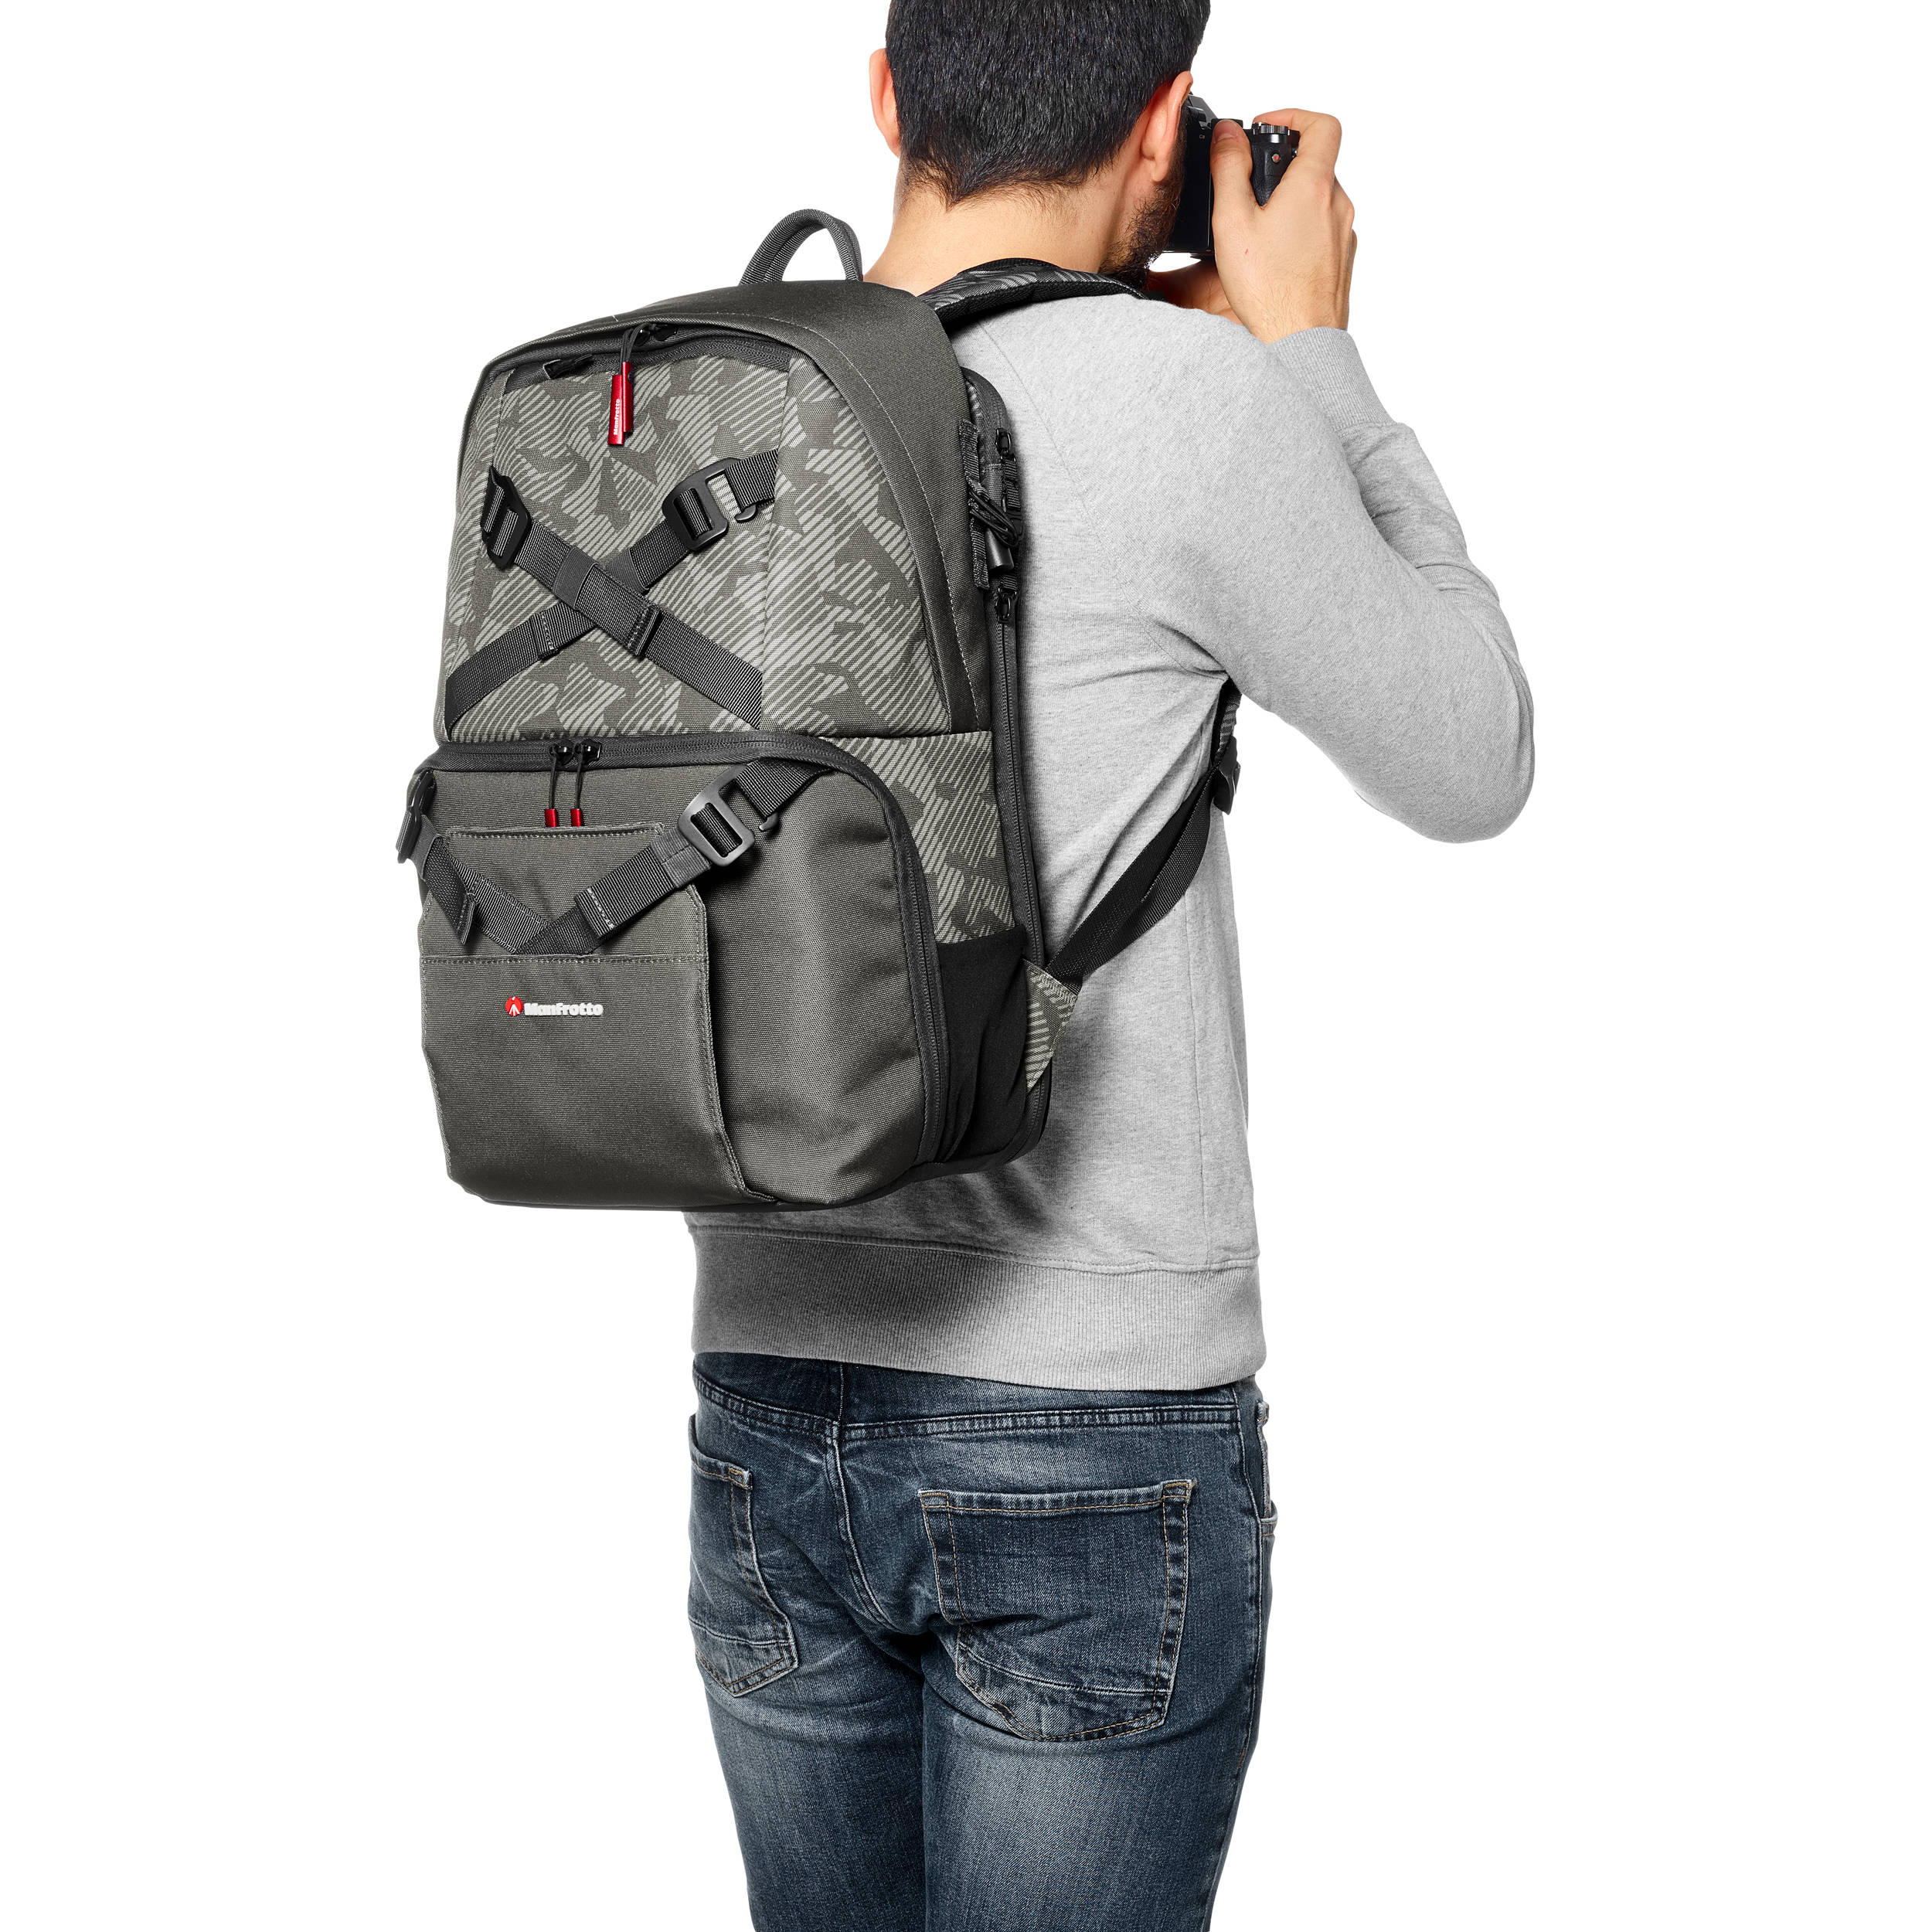 Manfrotto Noreg camera backpack-30 for DSLR/CSC